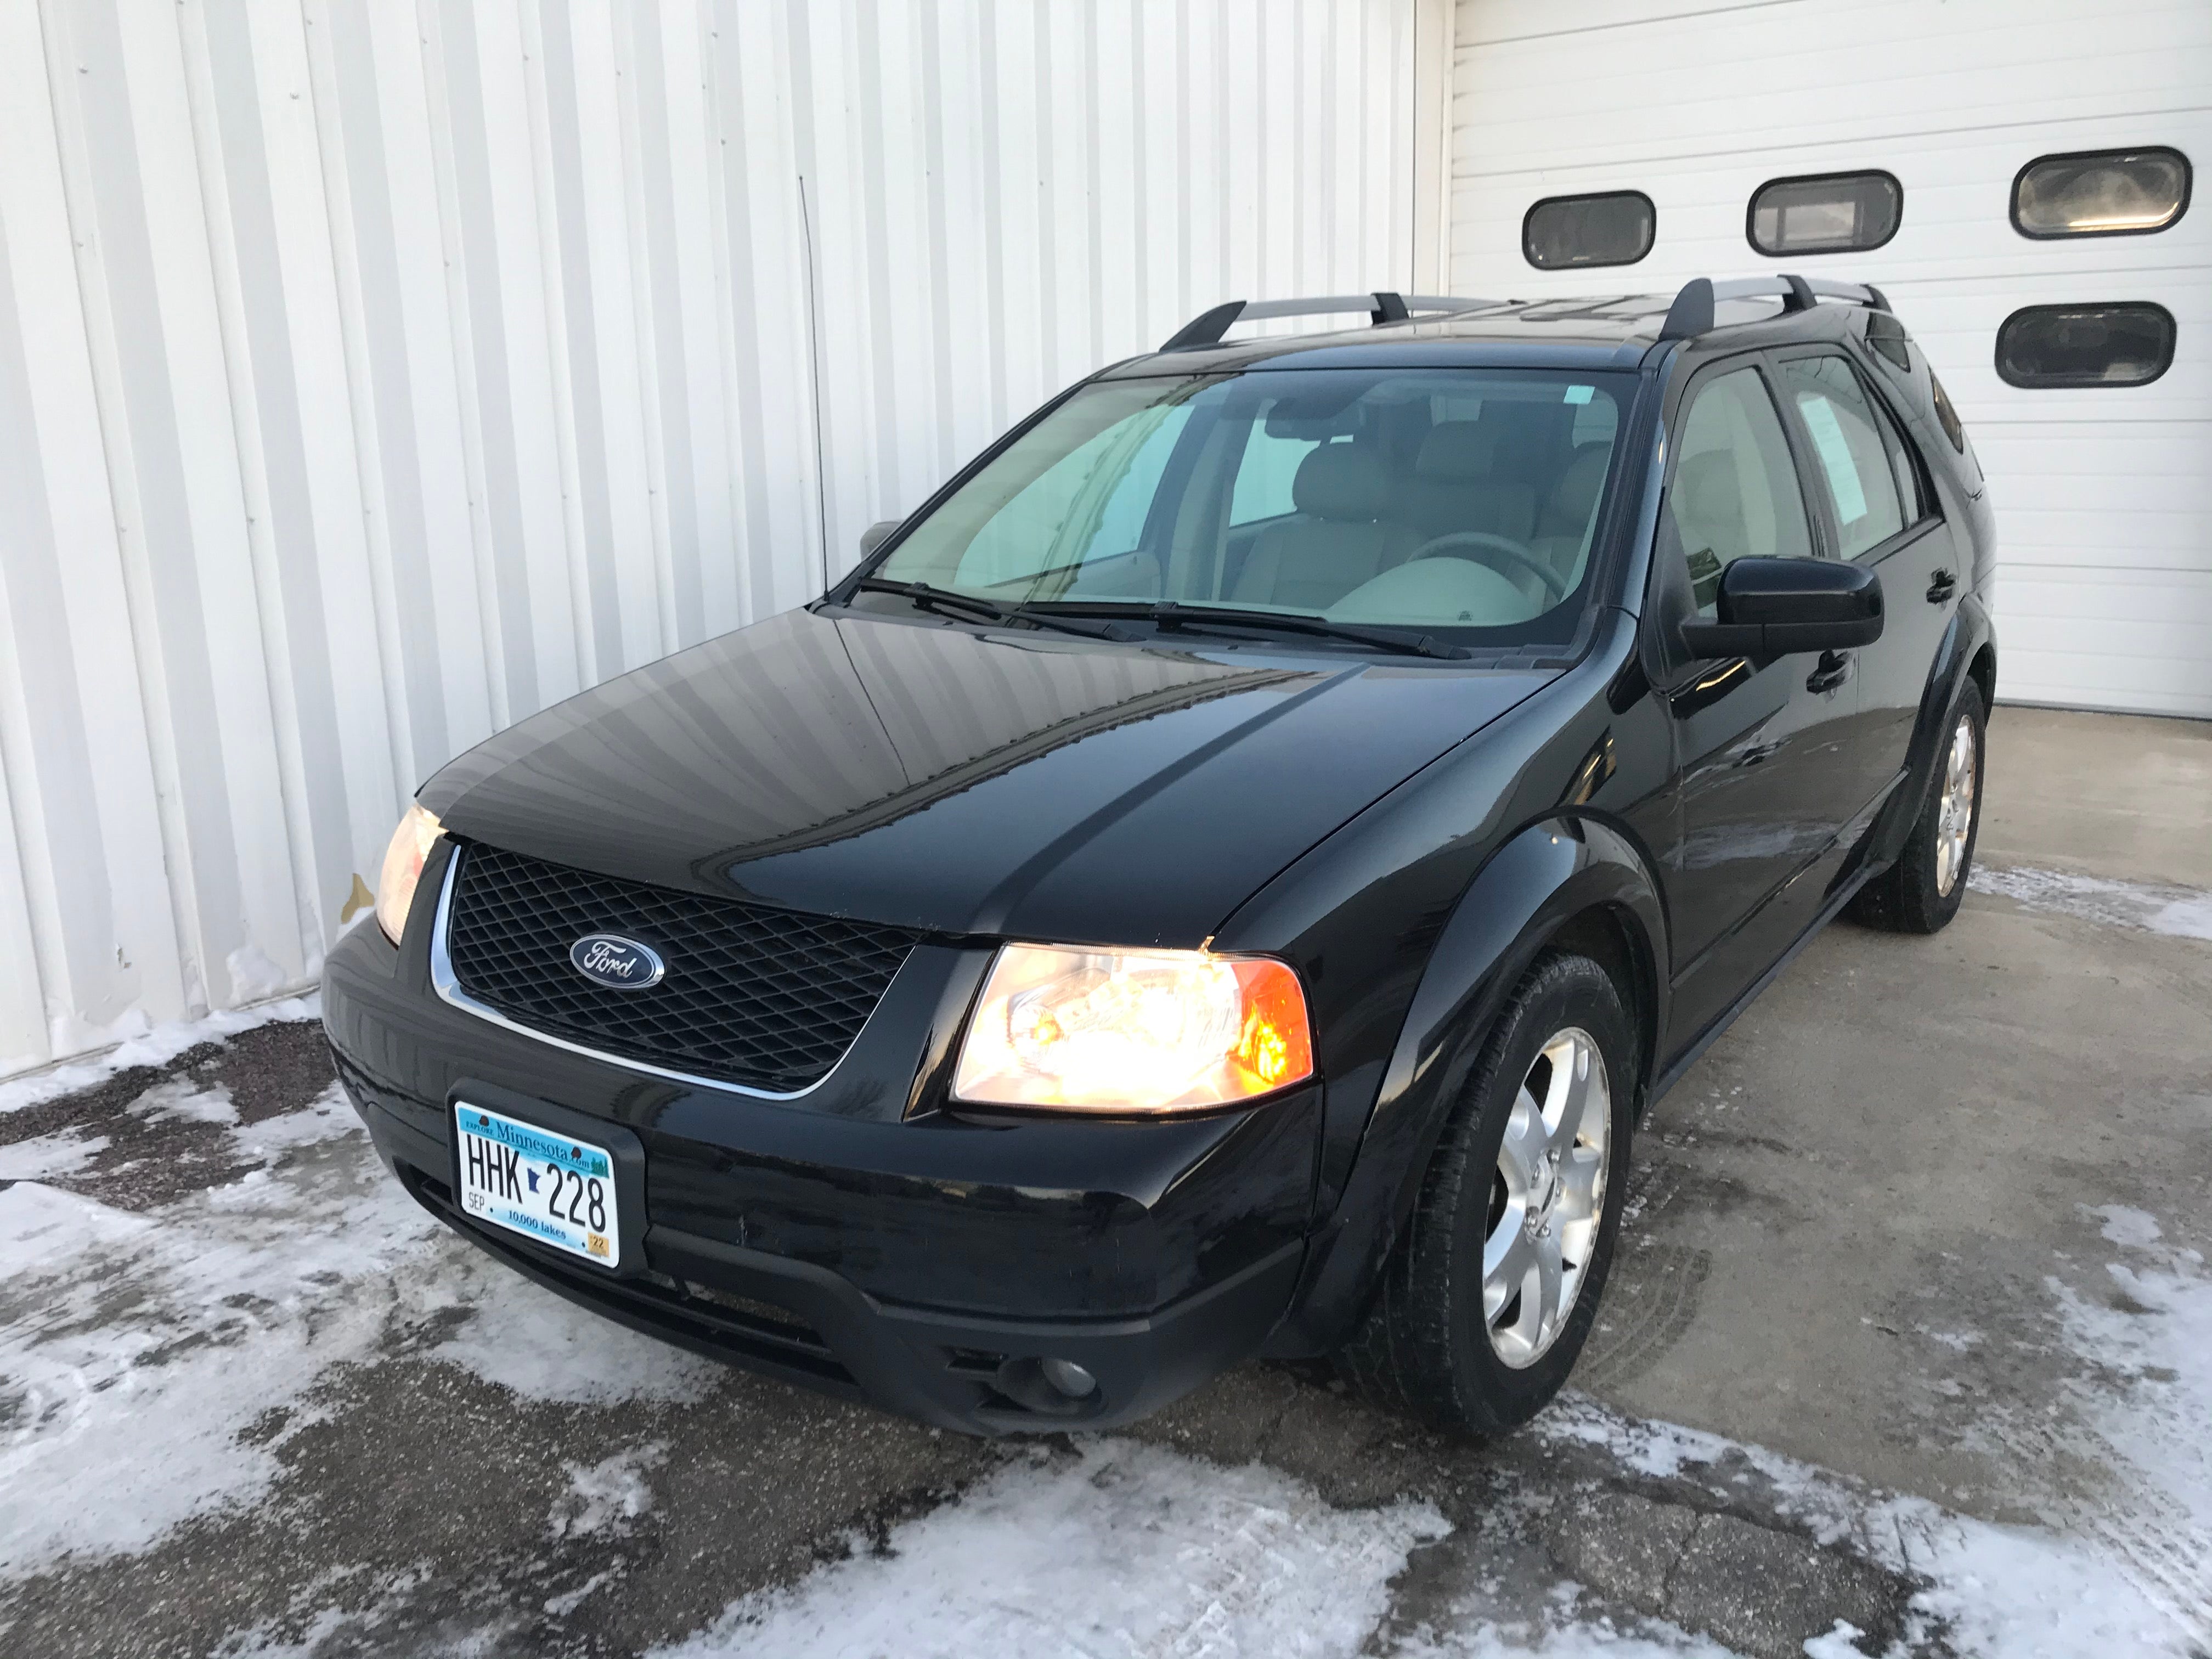 Used 2006 Ford Freestyle Limited with VIN 1FMZK06196GA03900 for sale in Arlington, Minnesota